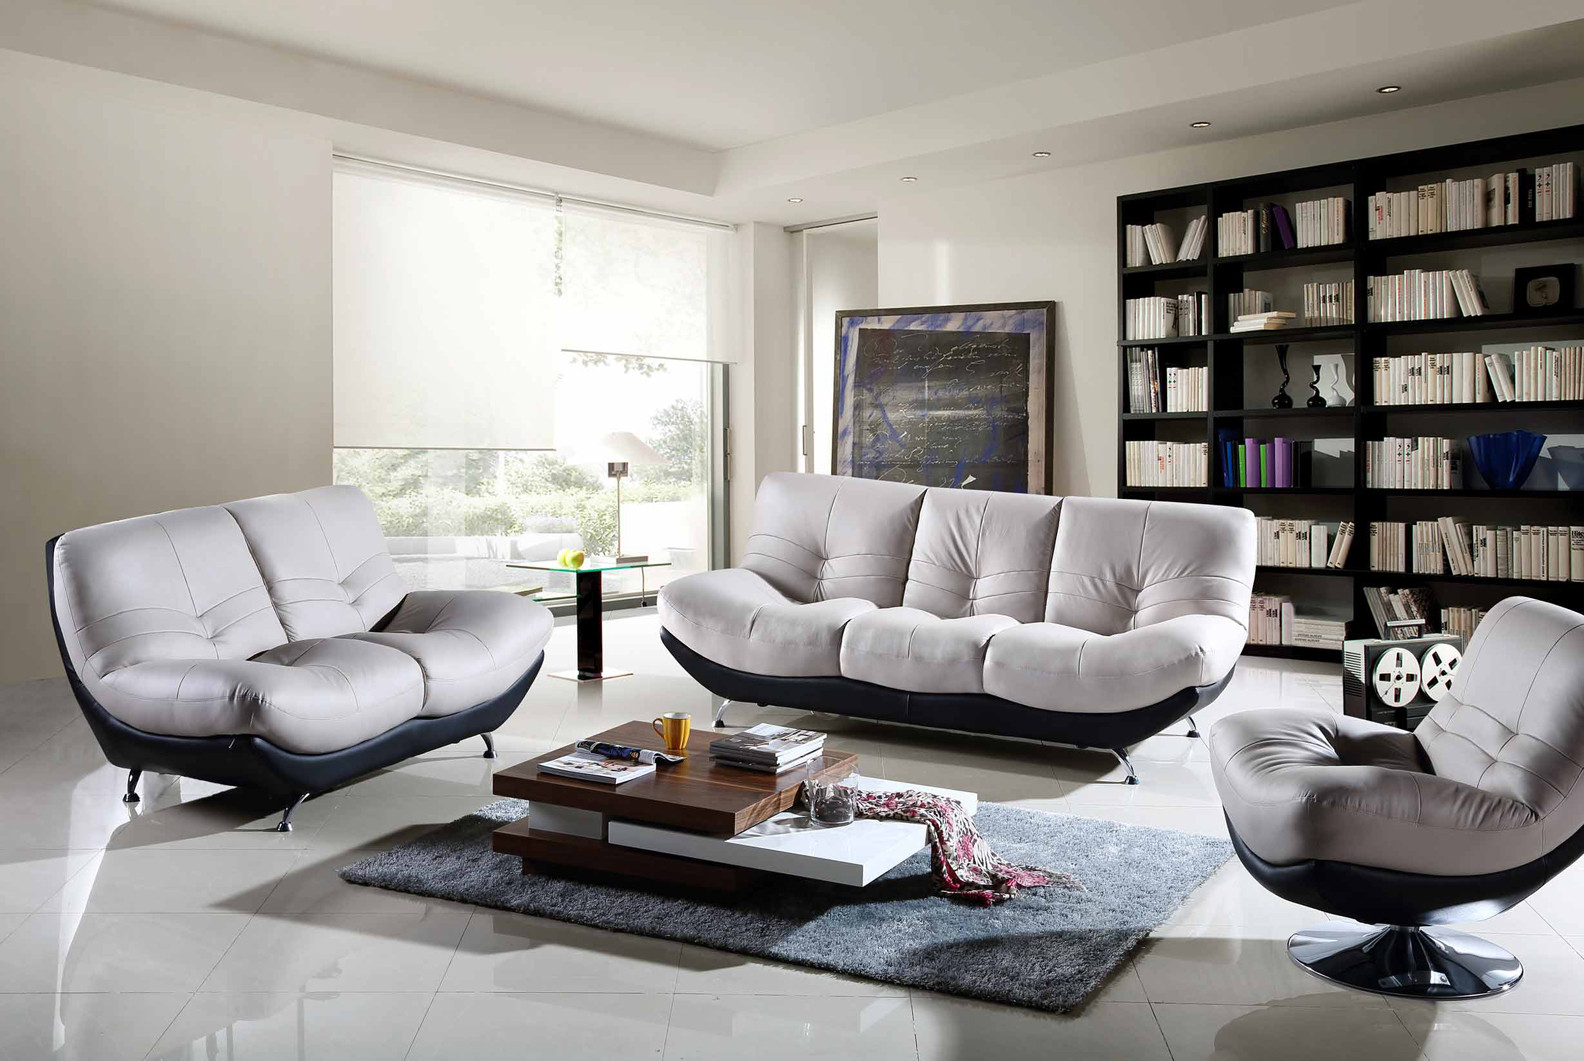 Minimalist Living Room Furniture
 line Shopping Furniture Has Many Advantages